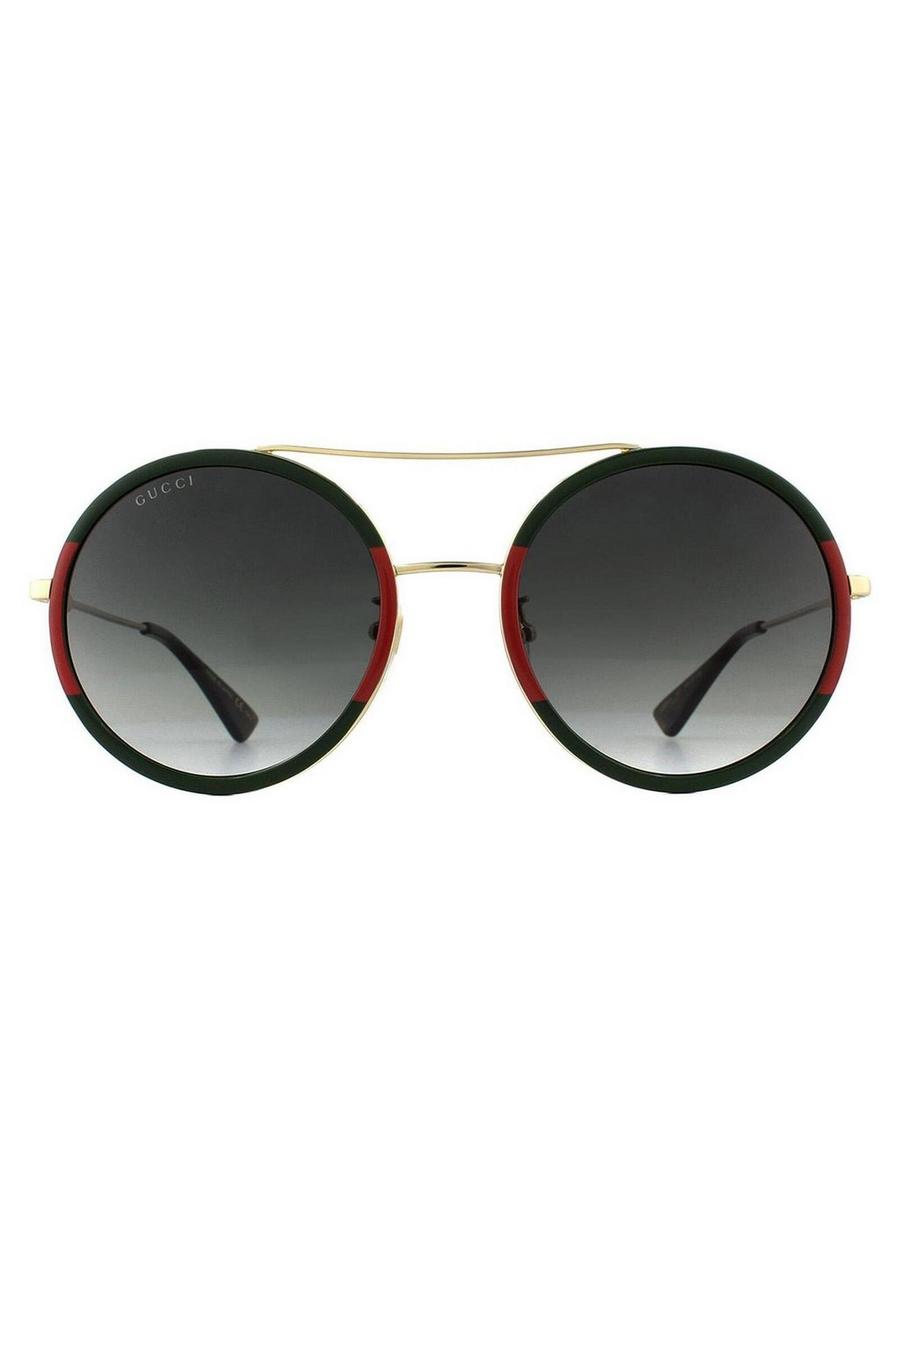 Round Gold Green and Red Green Gradient Sunglasses